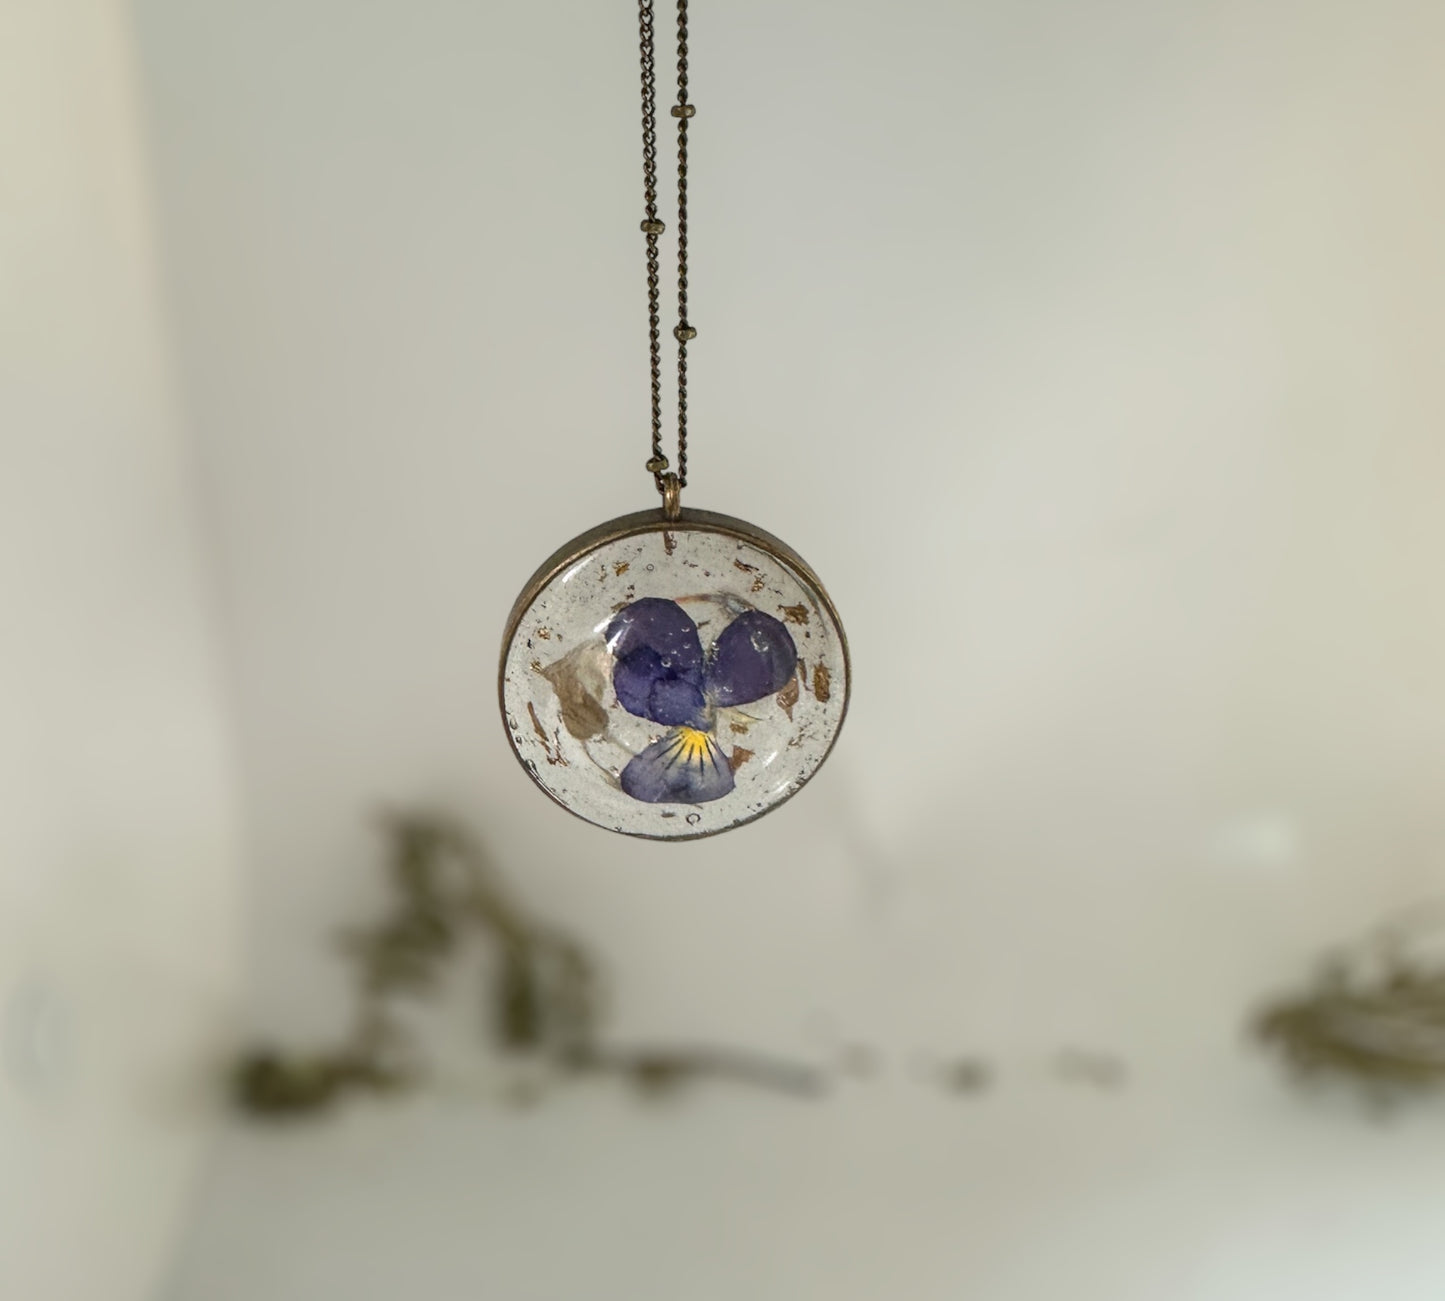 Dried Pansy Flower Pendant - Purple Bloom Nature Inspired Necklace